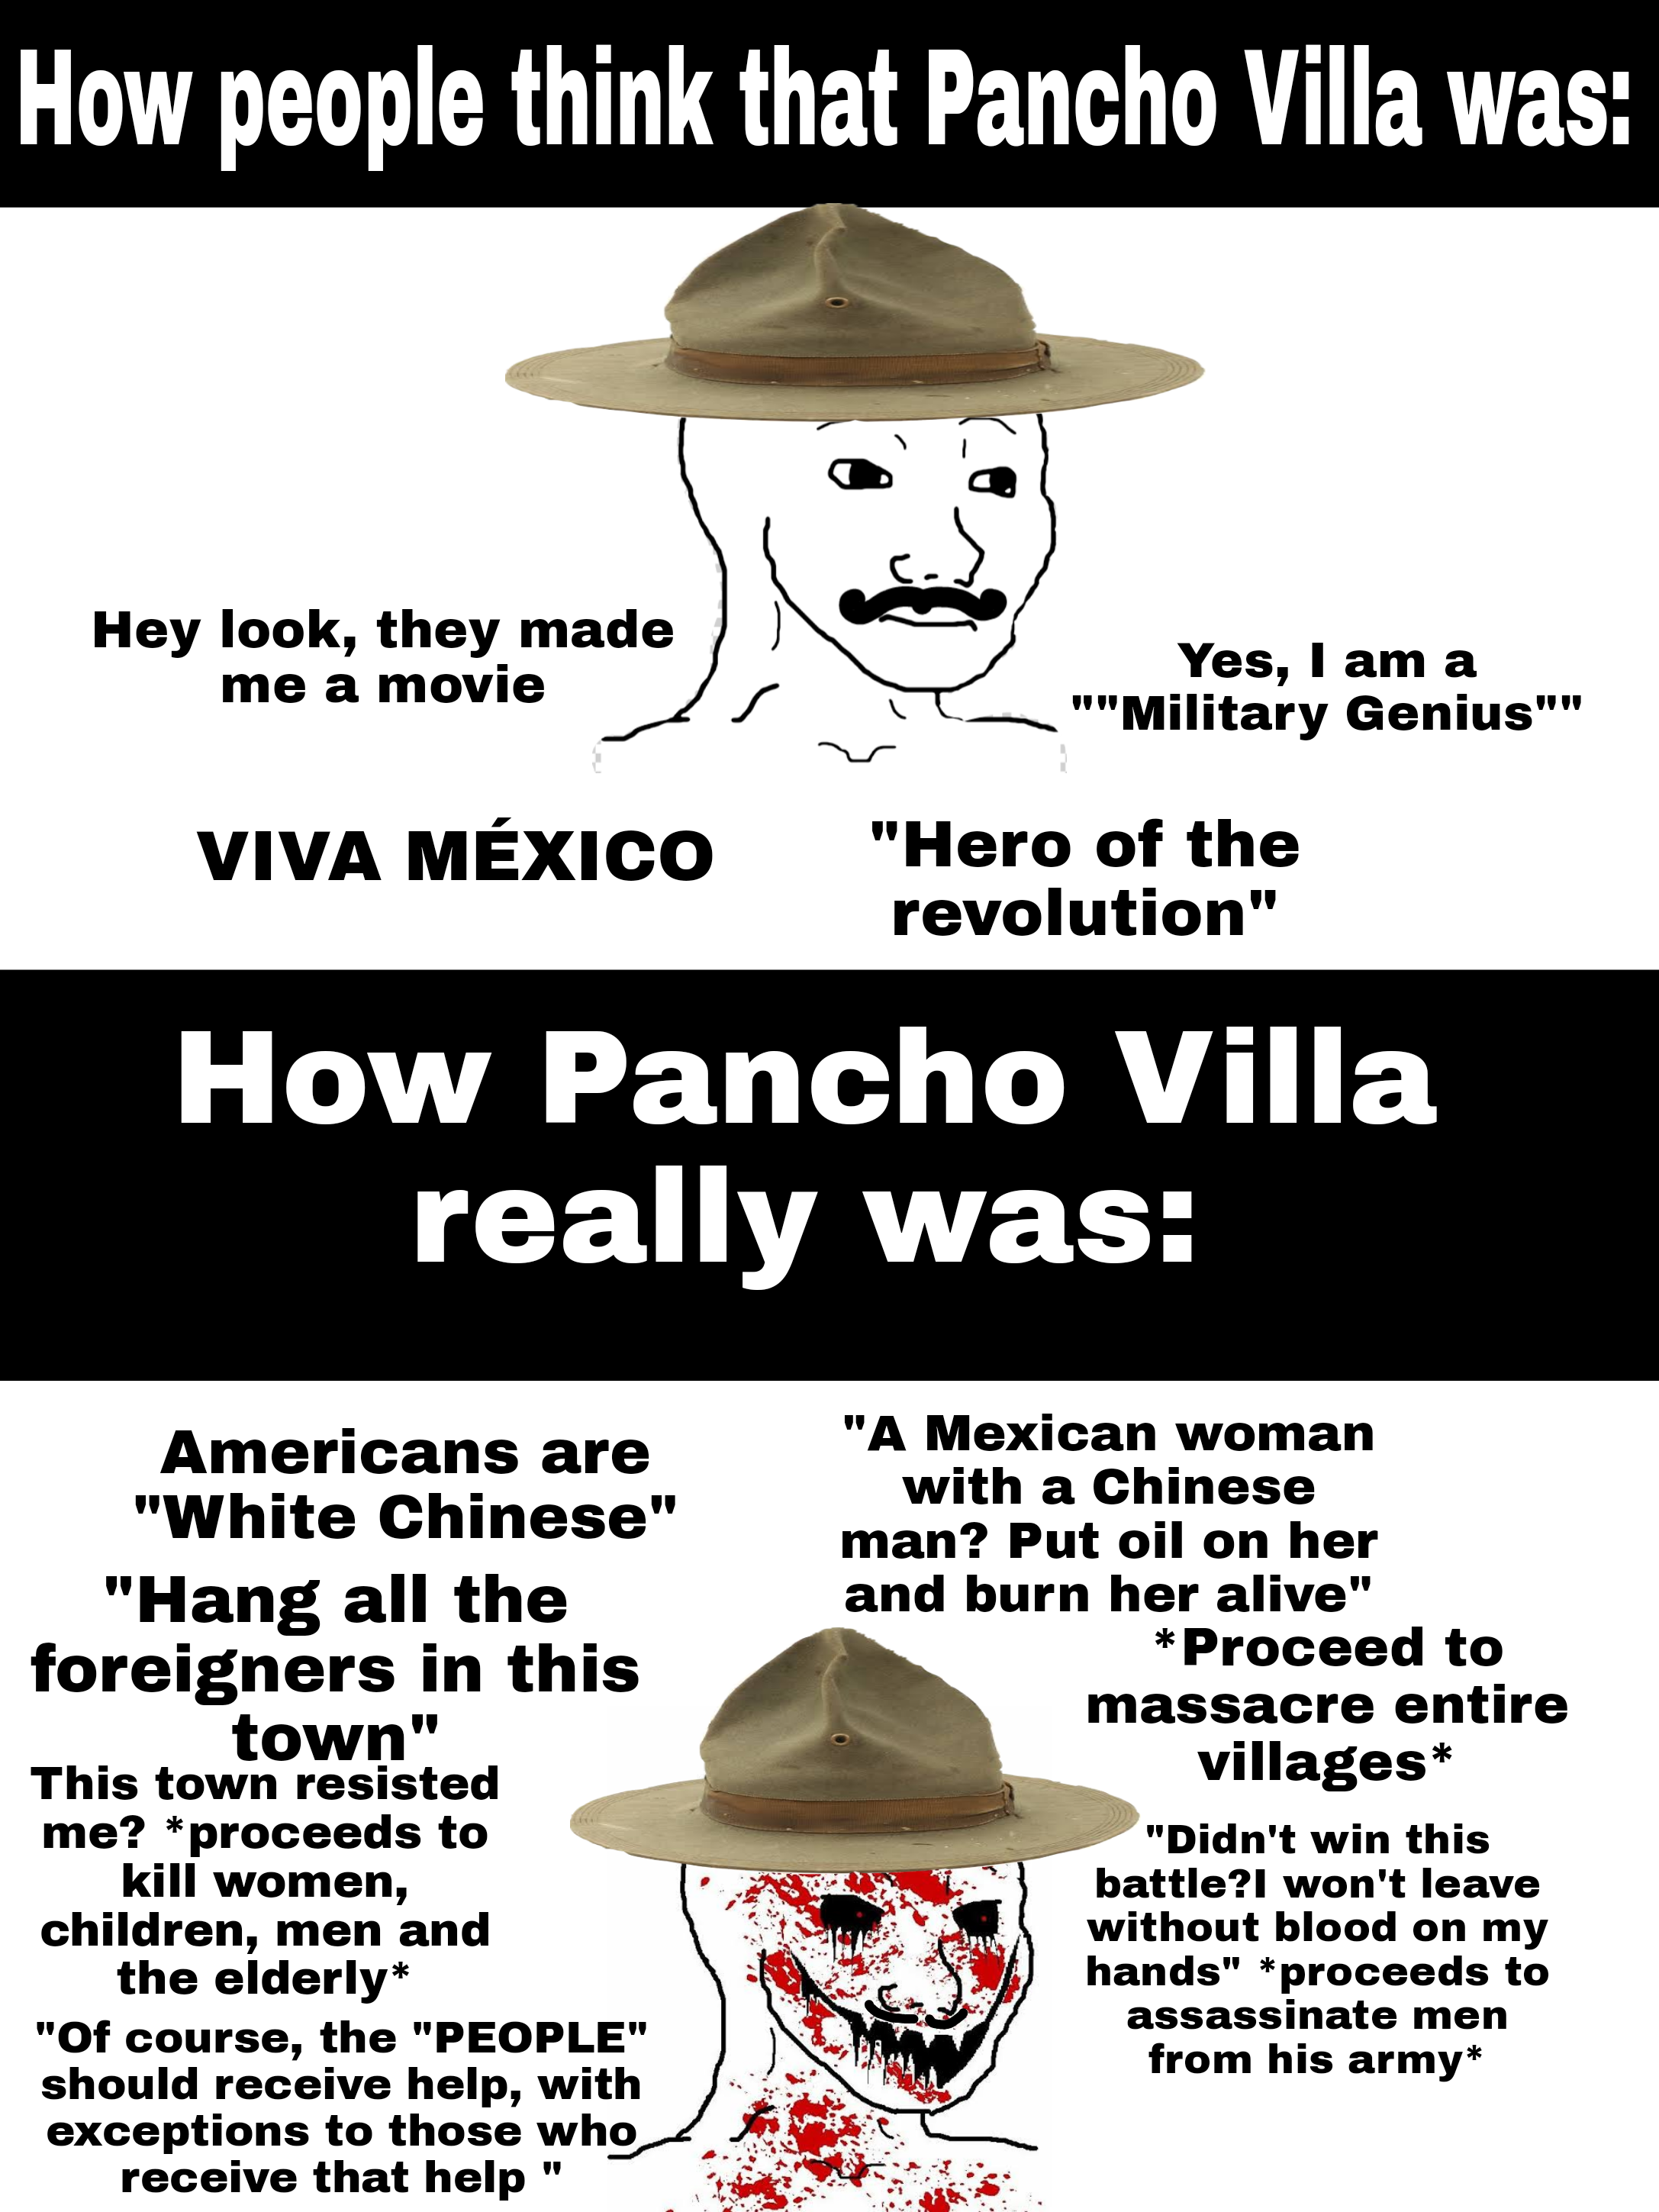 My God, I read the story of Pancho Villa and it's horrible